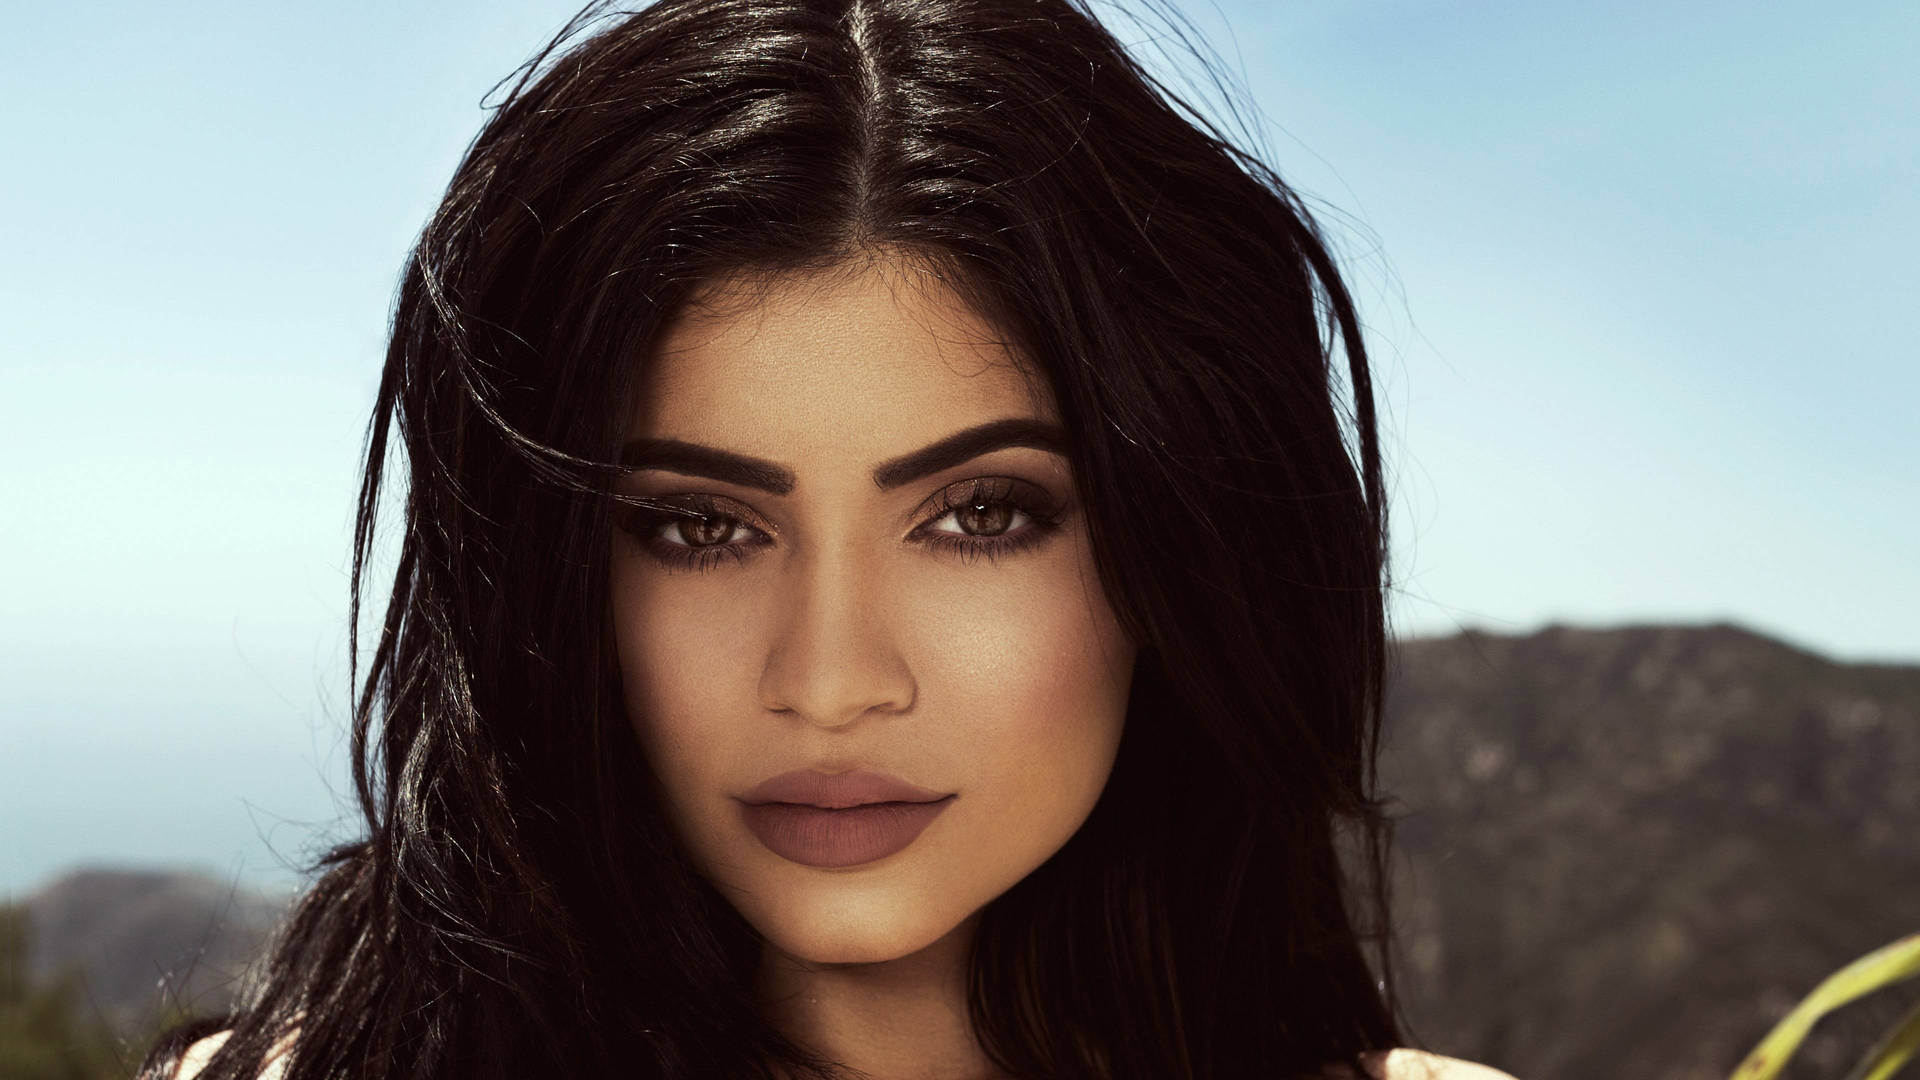 Kylie Jenner Top Shop Photoshoot